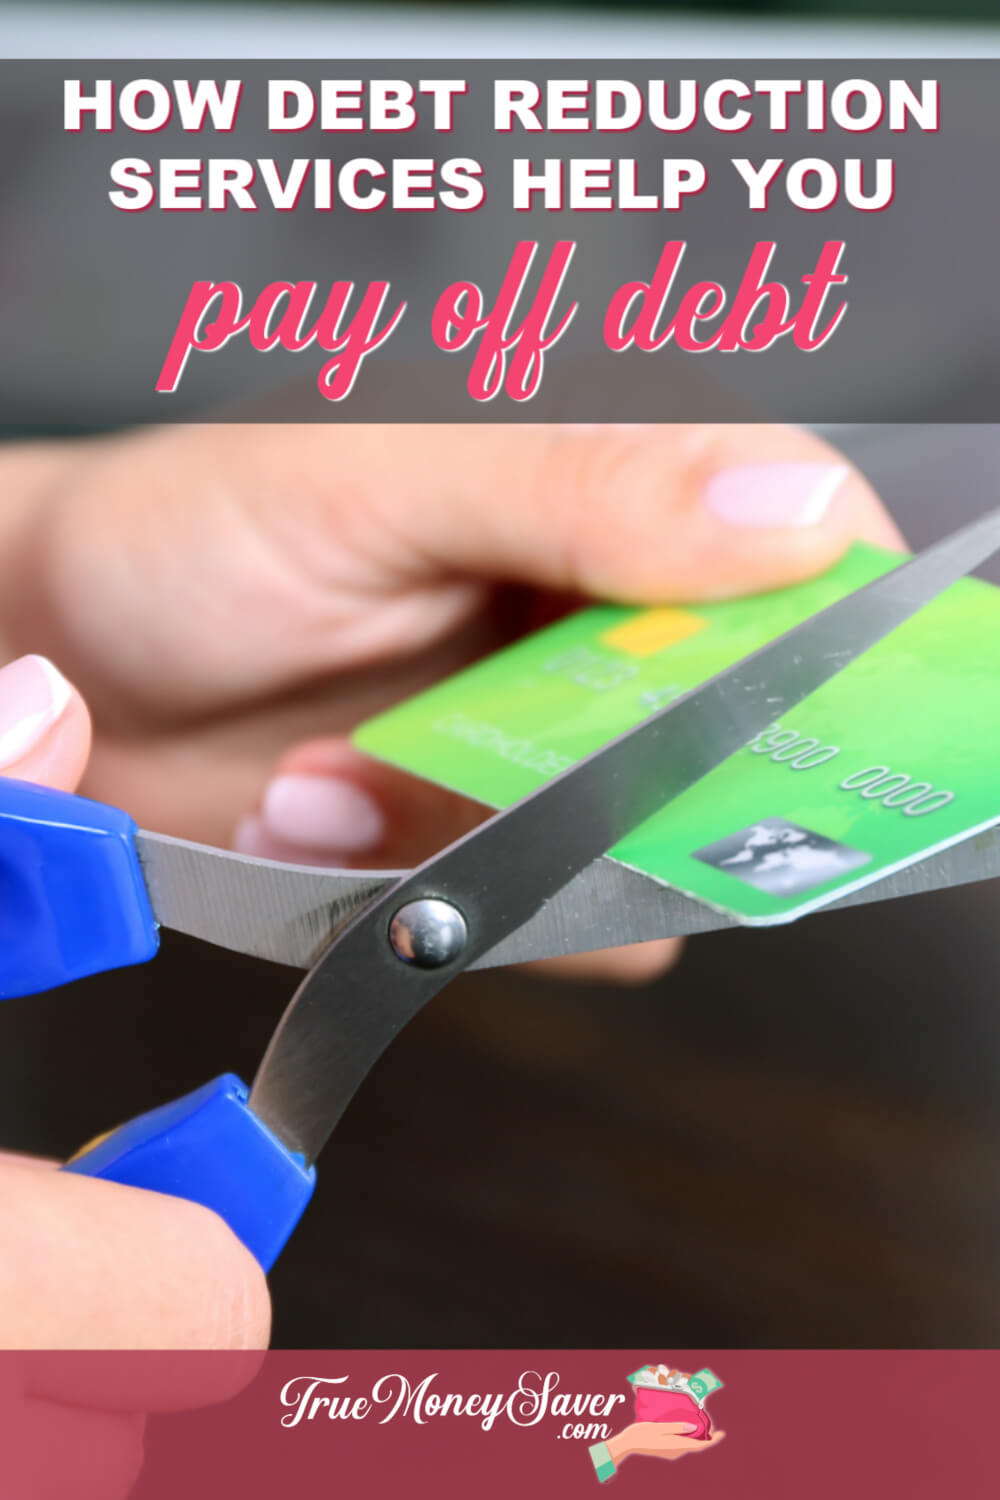 Are Debt Reduction Services A Good Solution To Pay Off Debt?